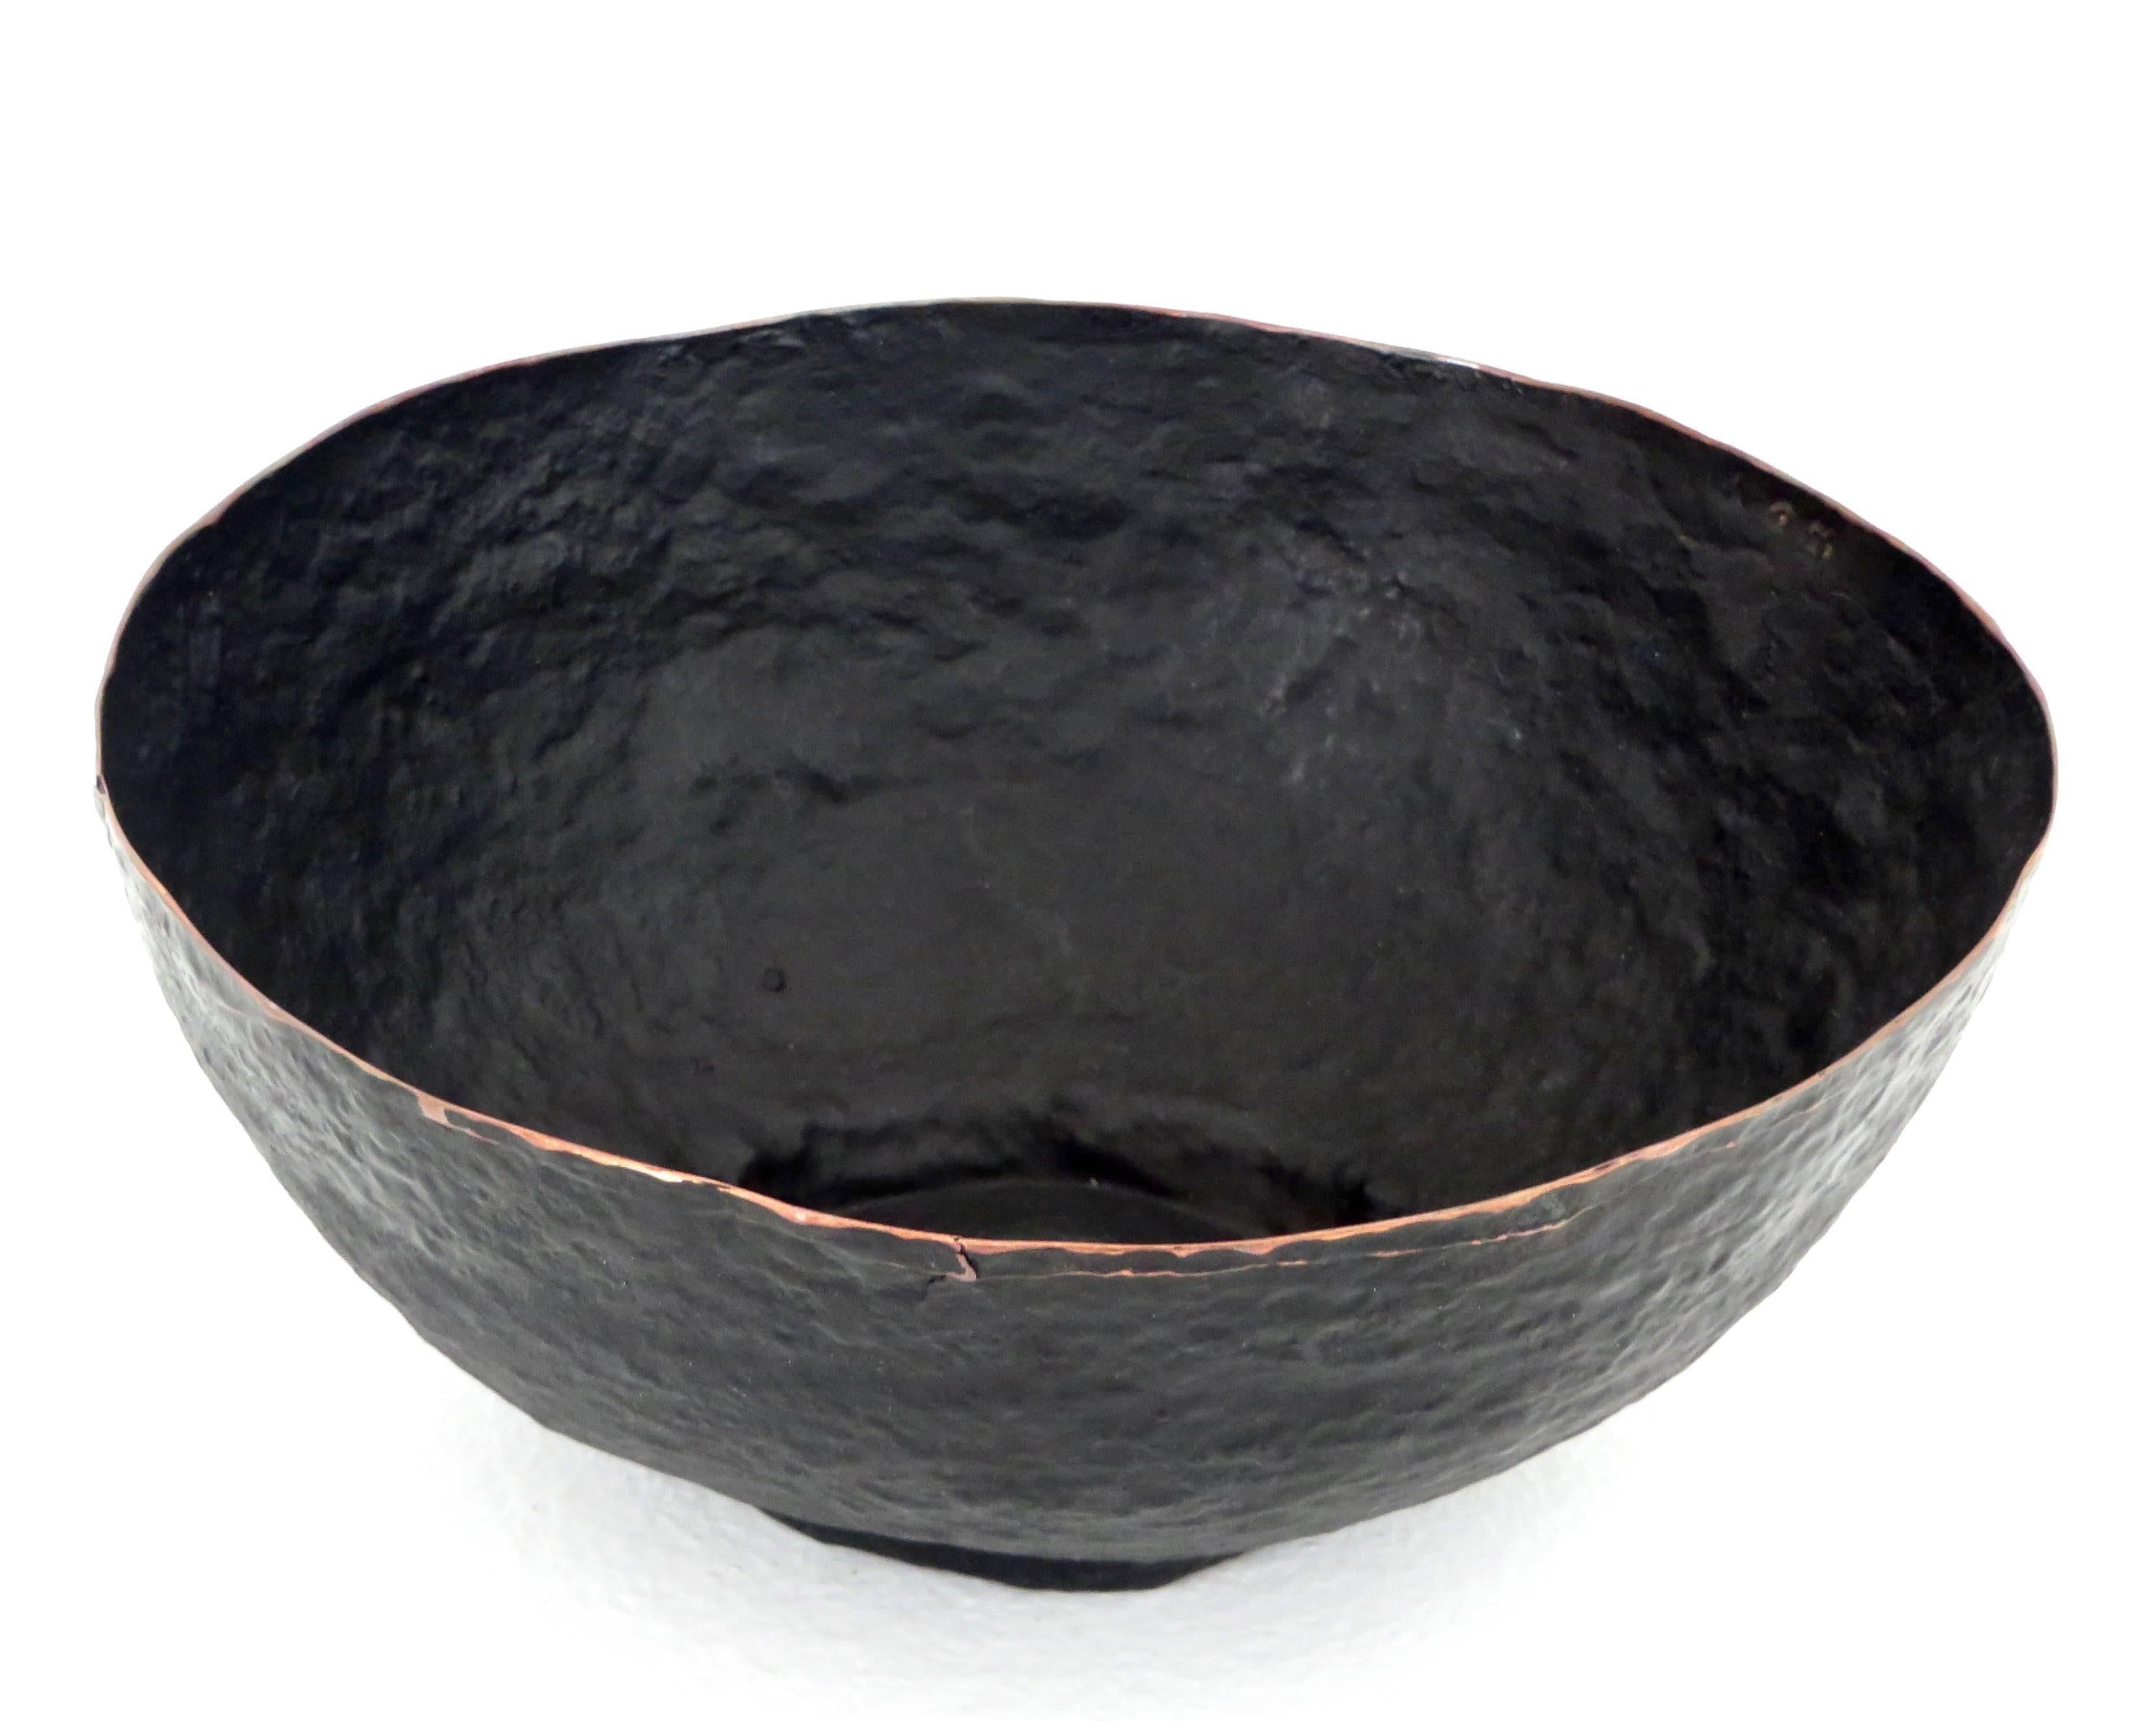 Hand-Crafted Hand-Hammered Copper Sculptural Bowl by HVNTER GVTHERER Poros Series